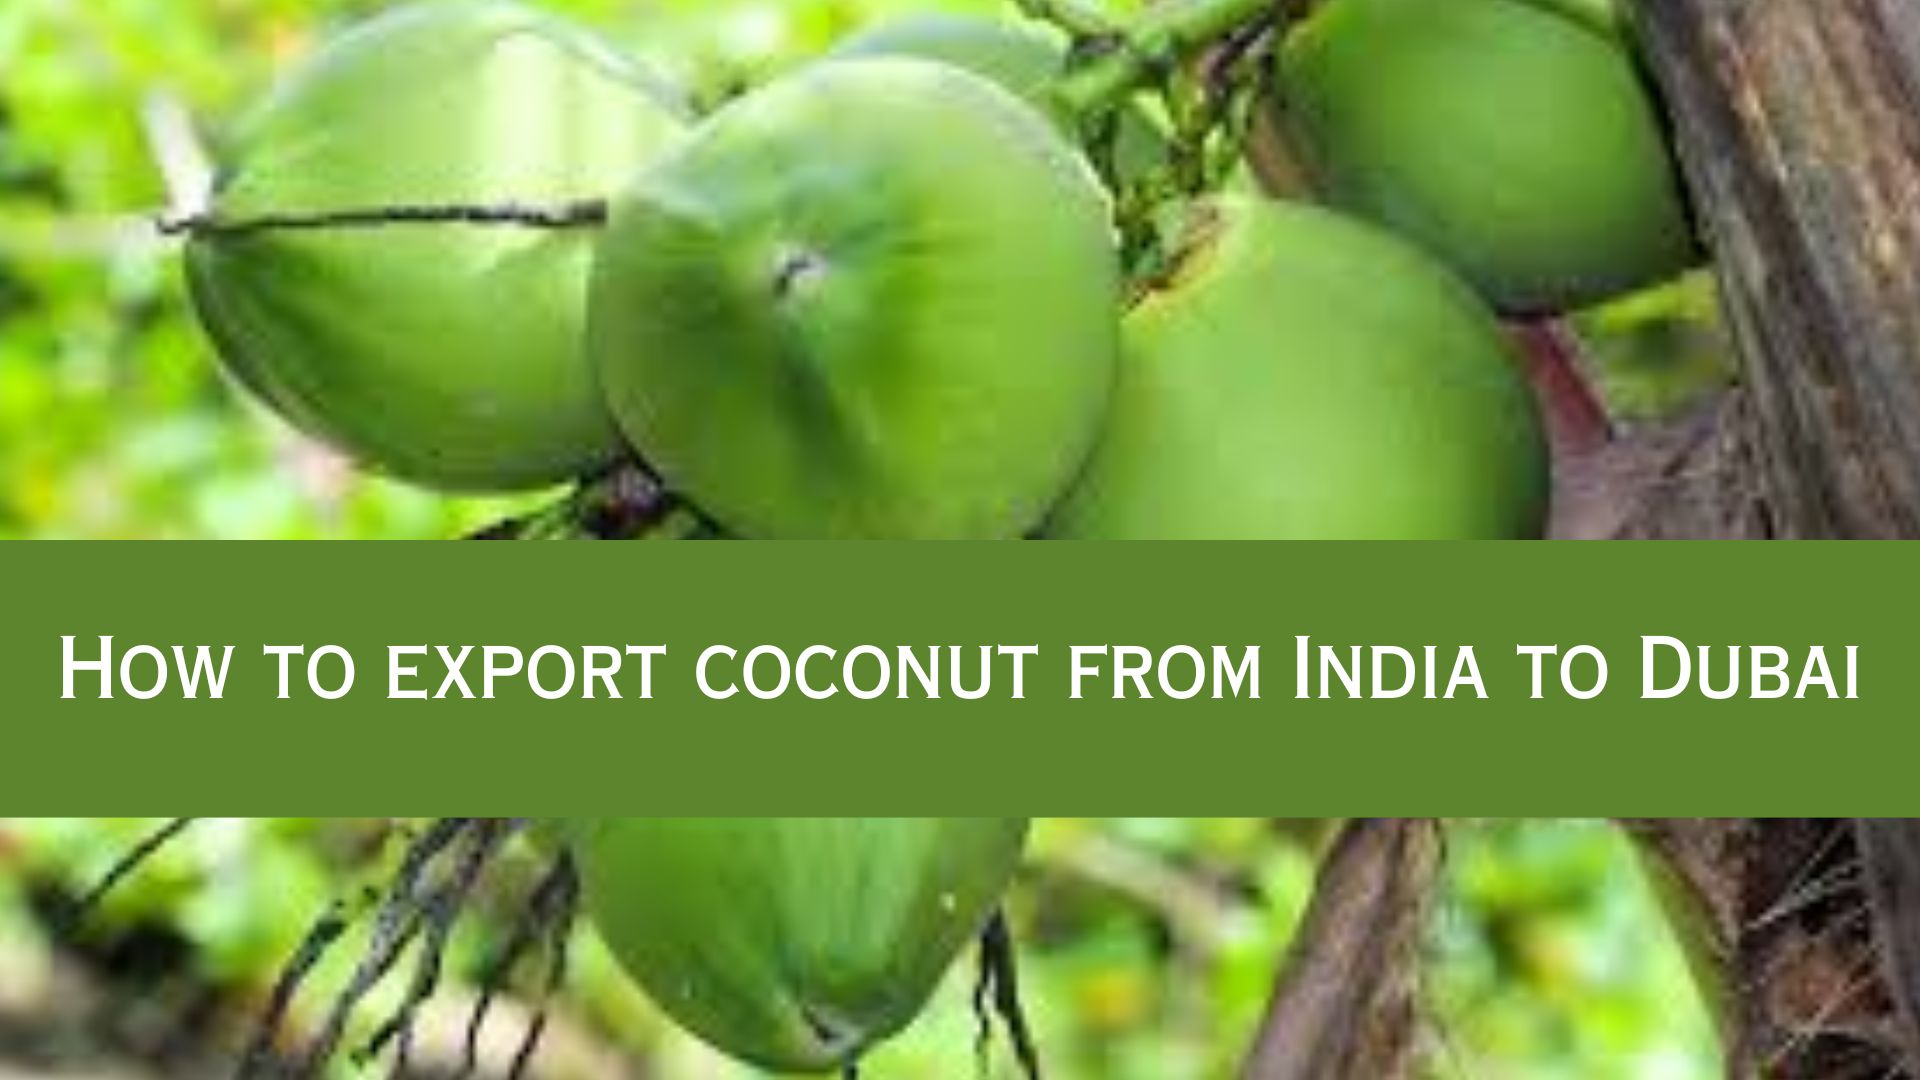 How to export coconut from India to Dubai | Raj Startup